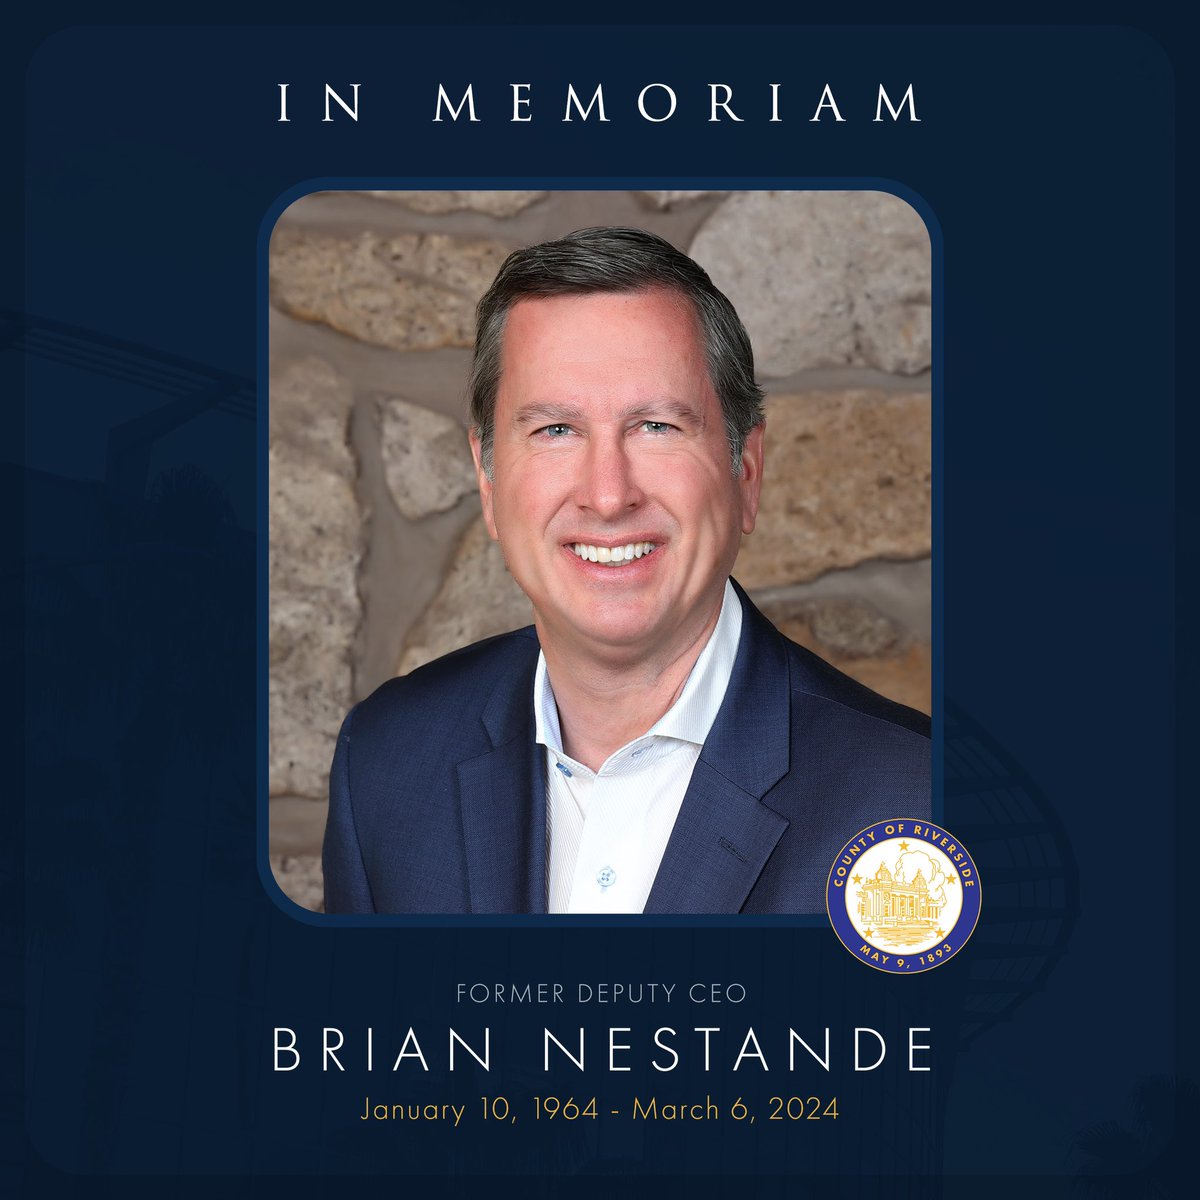 As we mourn the loss of our colleague and friend, I am reminded of the values he lived by, most notably partnership, curiosity, and humor. Brian embodied the belief that we can go farther together. He posed questions that sought root causes and lasting solutions. And his quick…